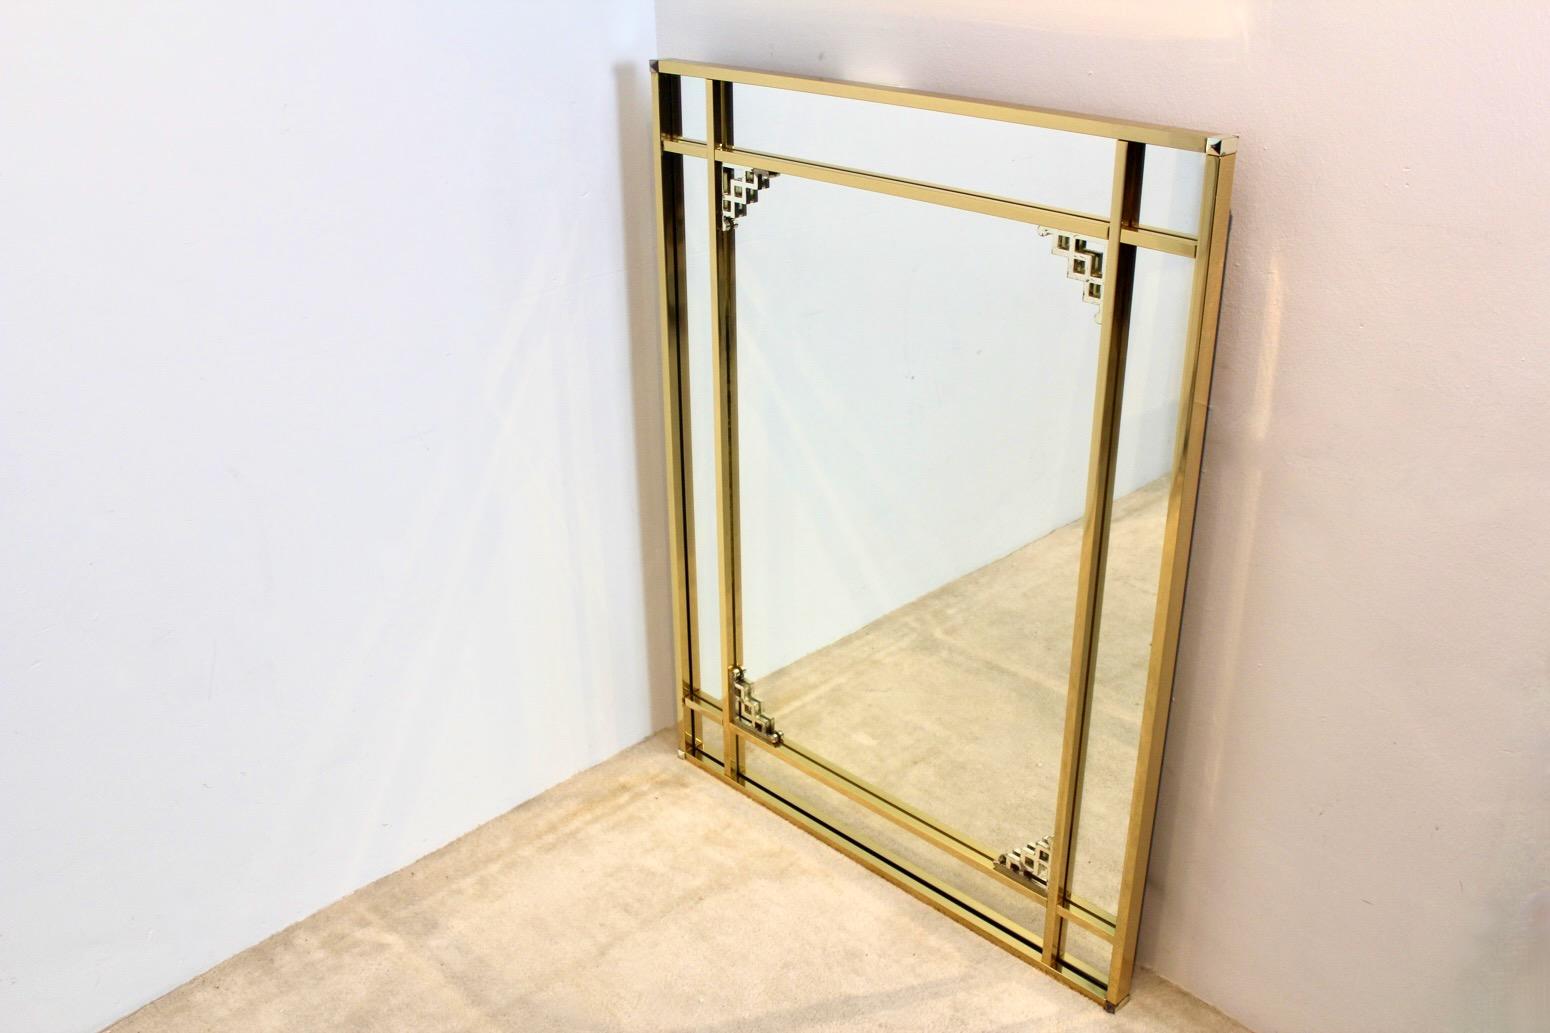 Beautiful Large Brass framed Mirror with chromed inlay and sophisticated Graphical design. Made in Belgium by Belgochrom in the 1970s. The table is a unique example of the Hollywood Regency style. The frame has some wear on the chrome due to normal